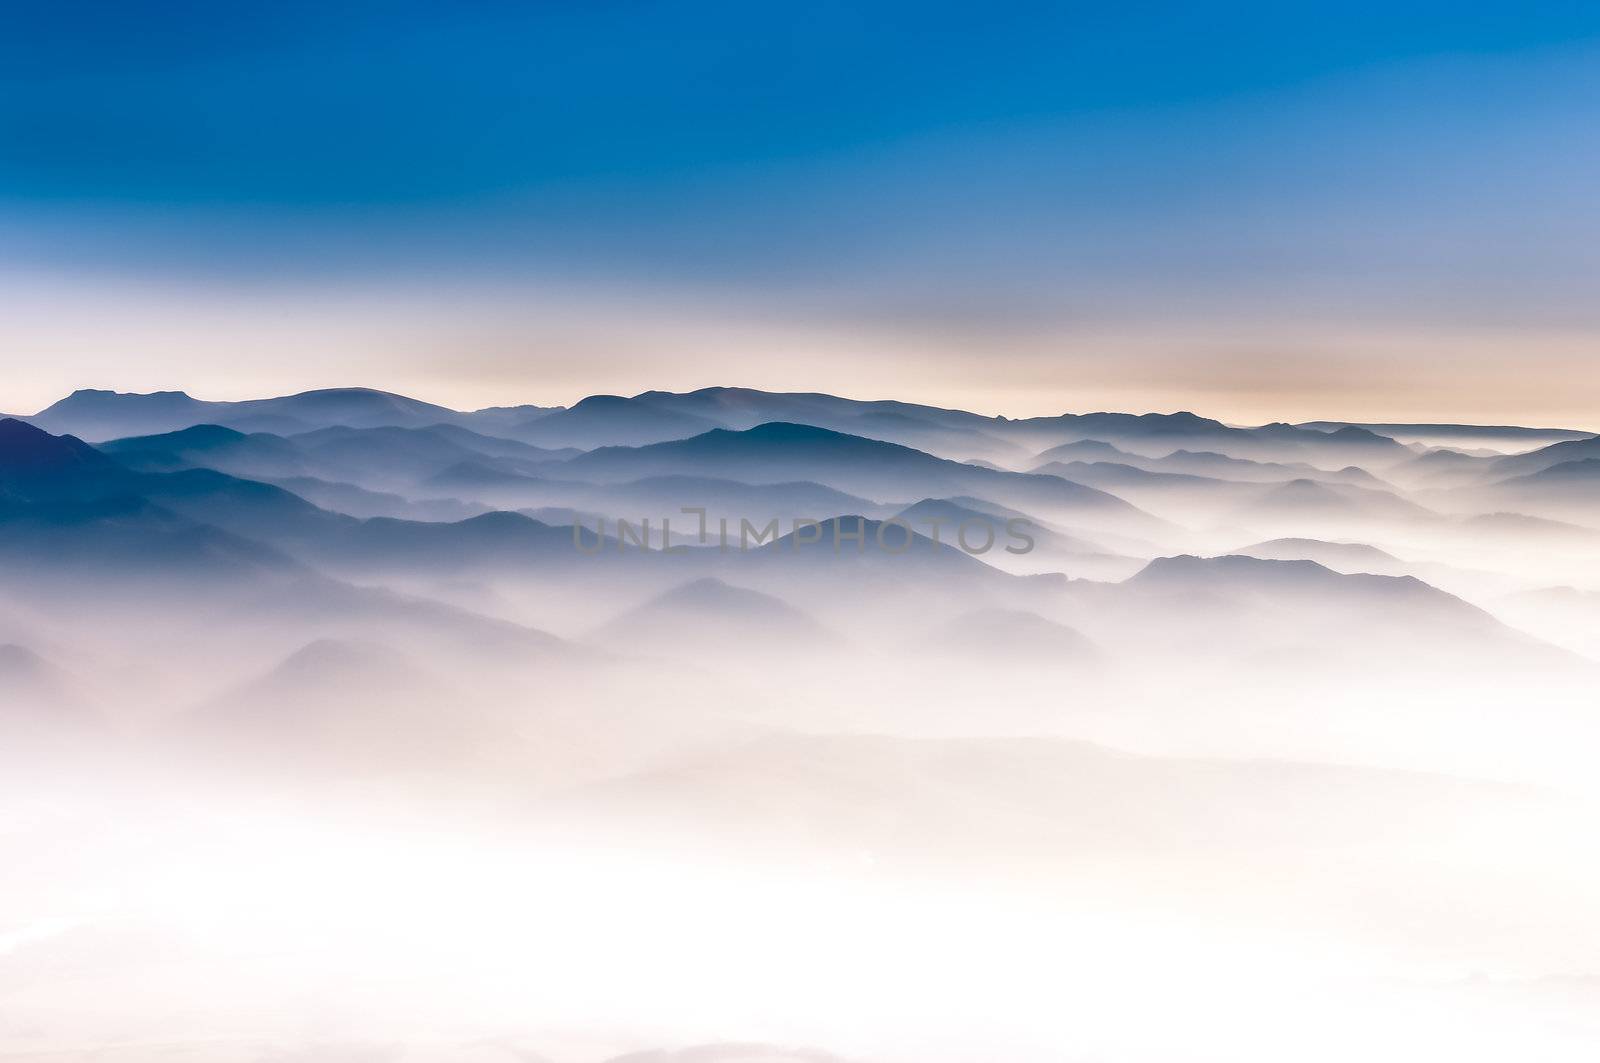 Misty mountains magical landscape view with blue sky